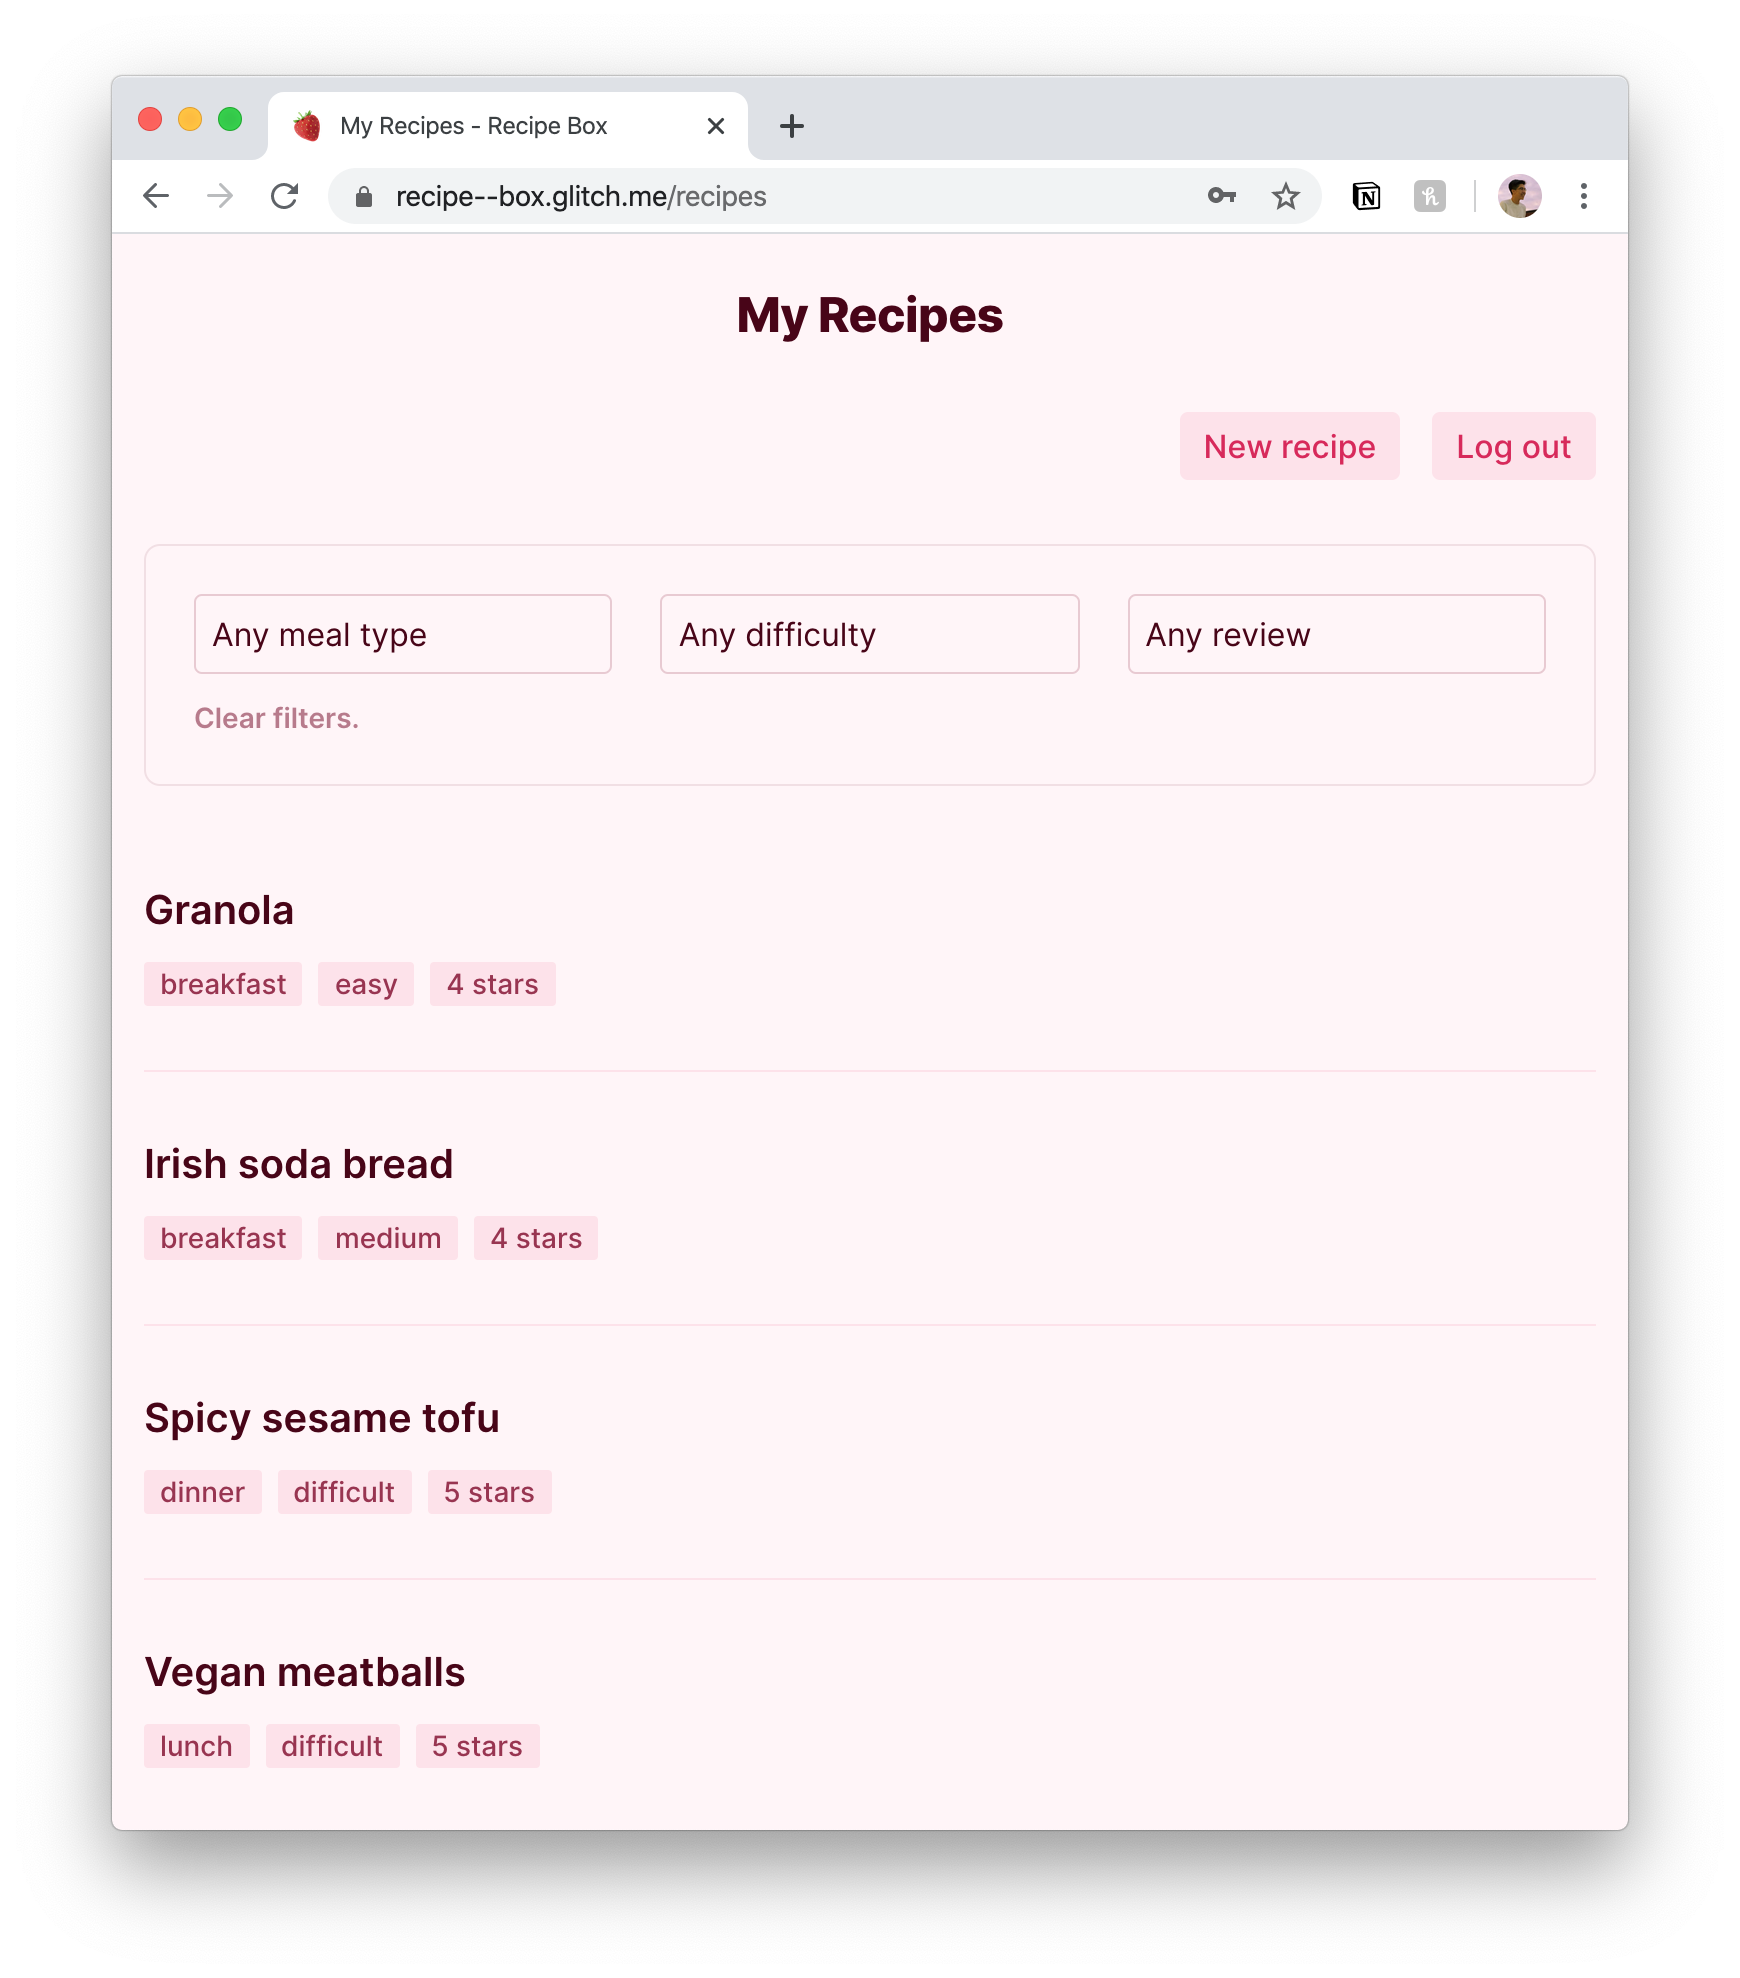 A screenshot of the recipes view of the app.